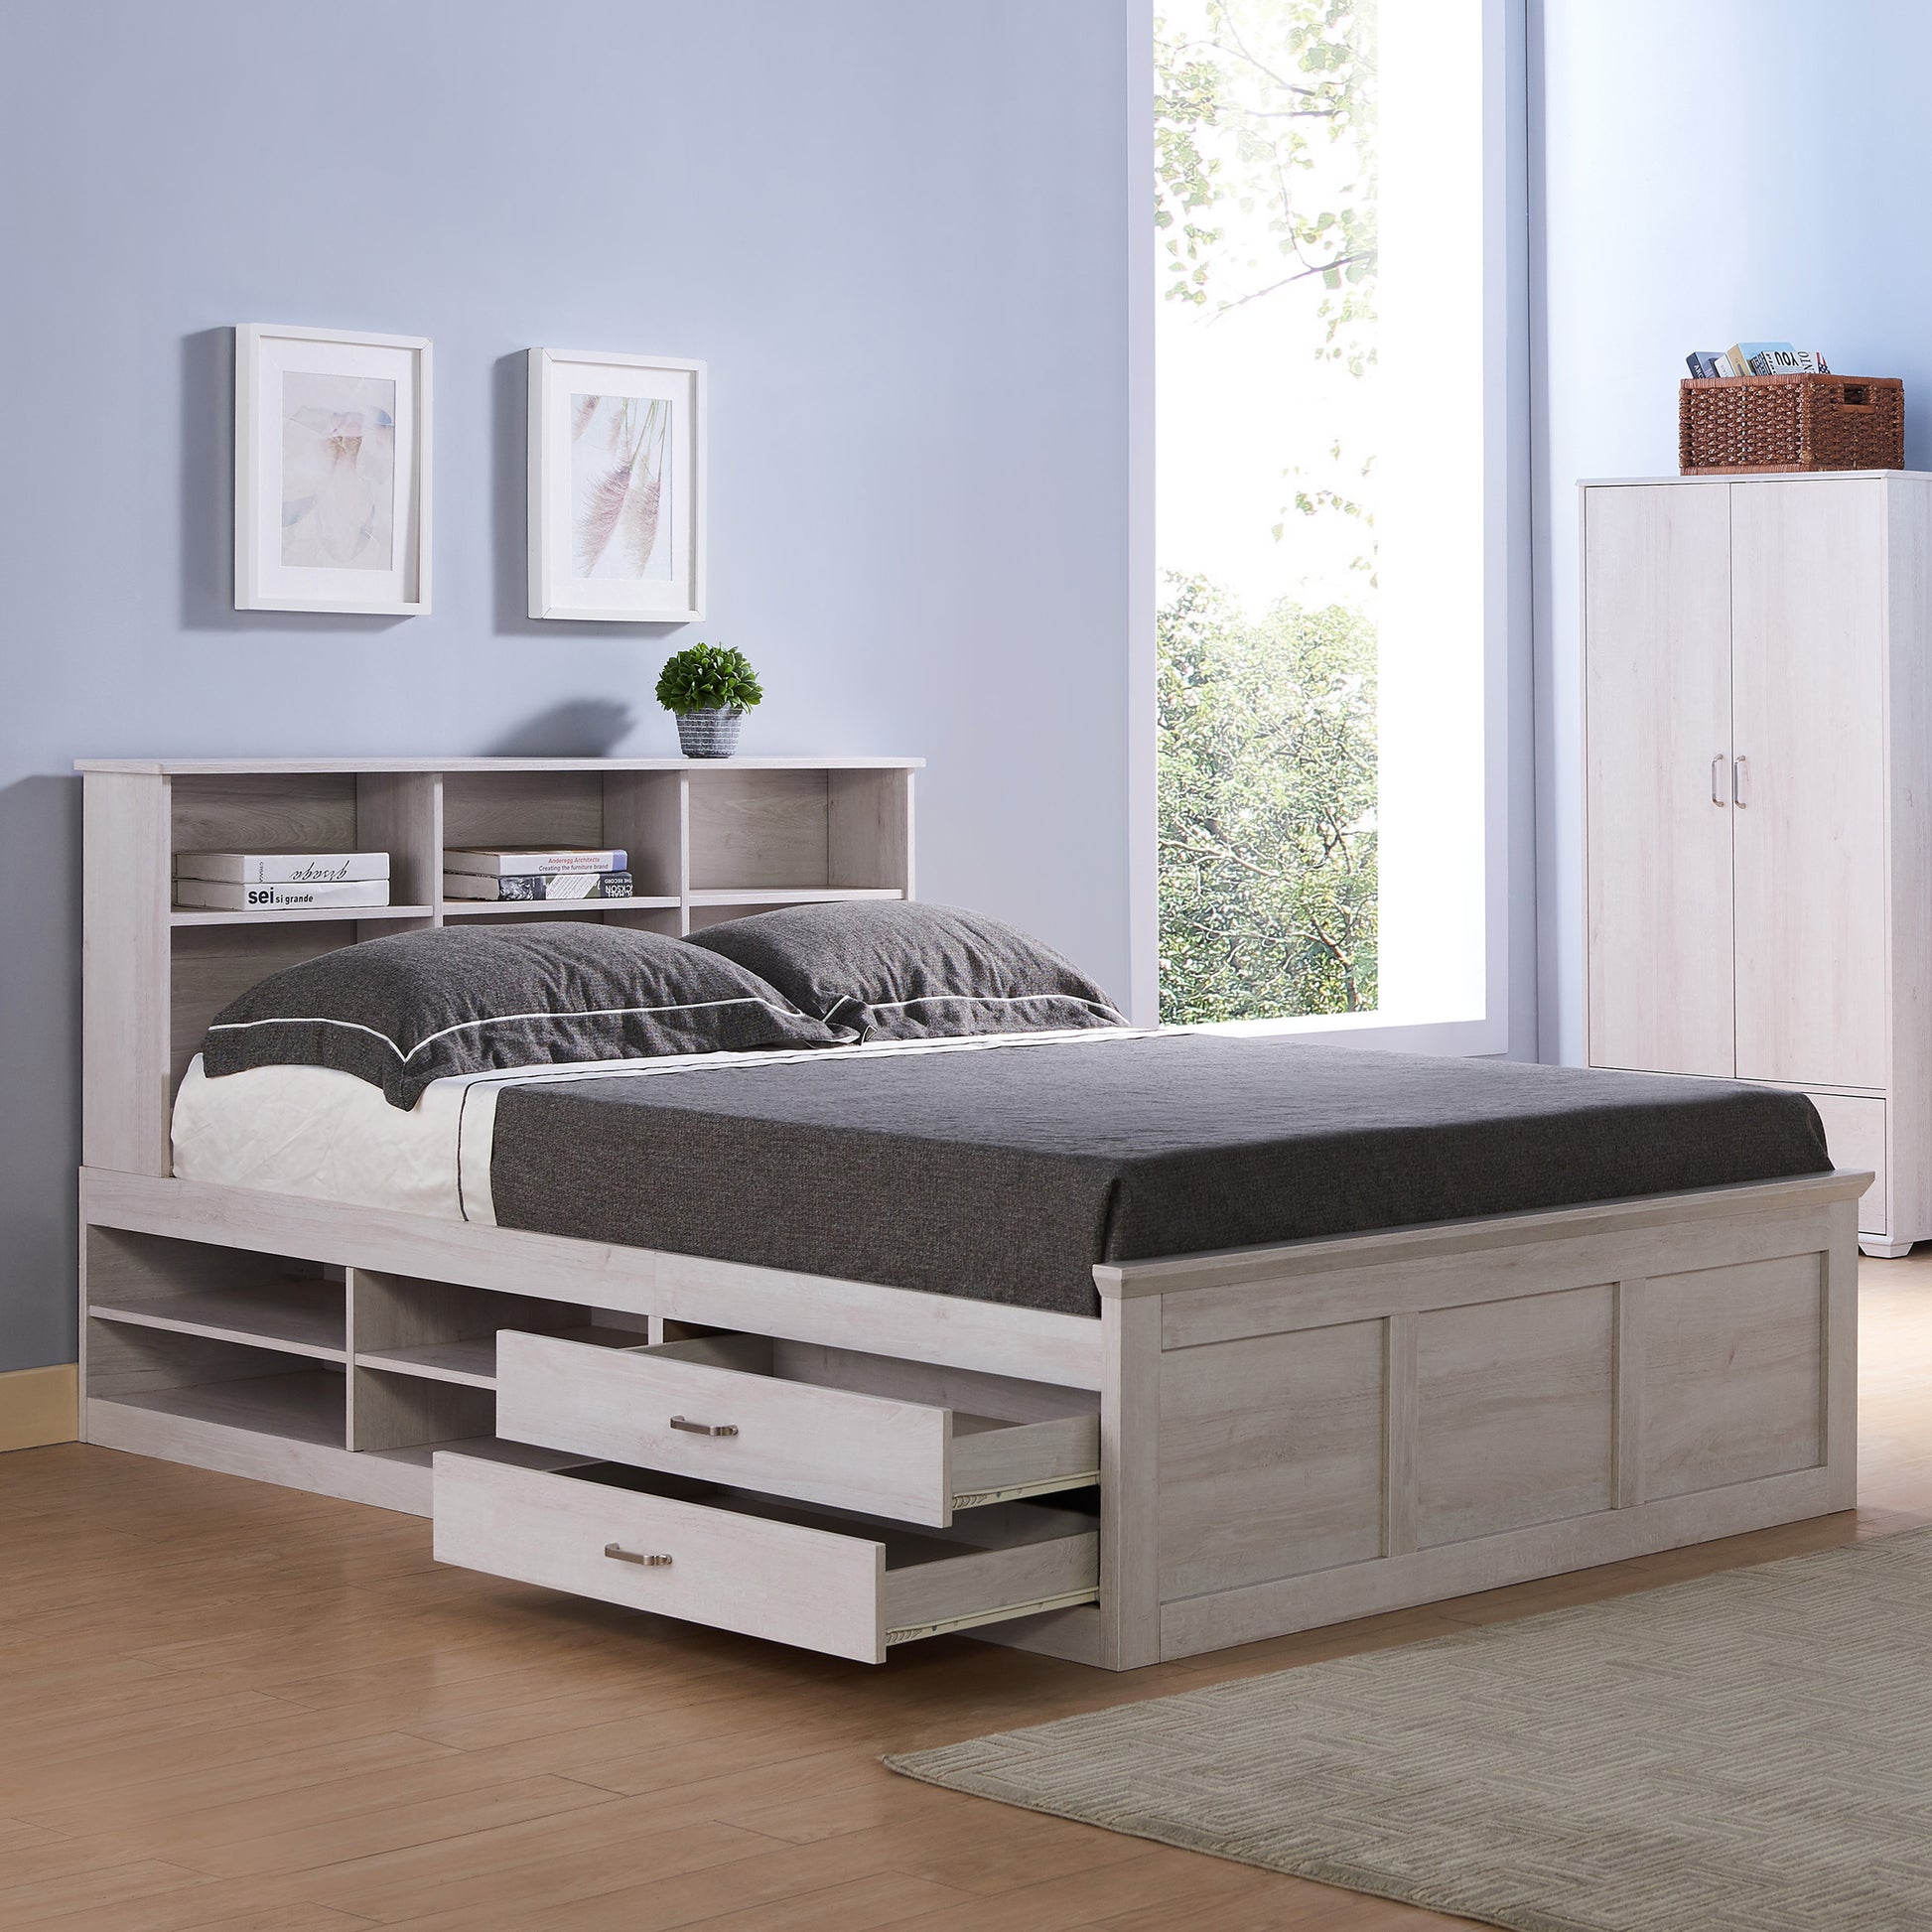 Right angled transitional white oak two-drawer four-shelf storage bed shown with optional bookcase headboard and drawers open in a bedroom with accessories